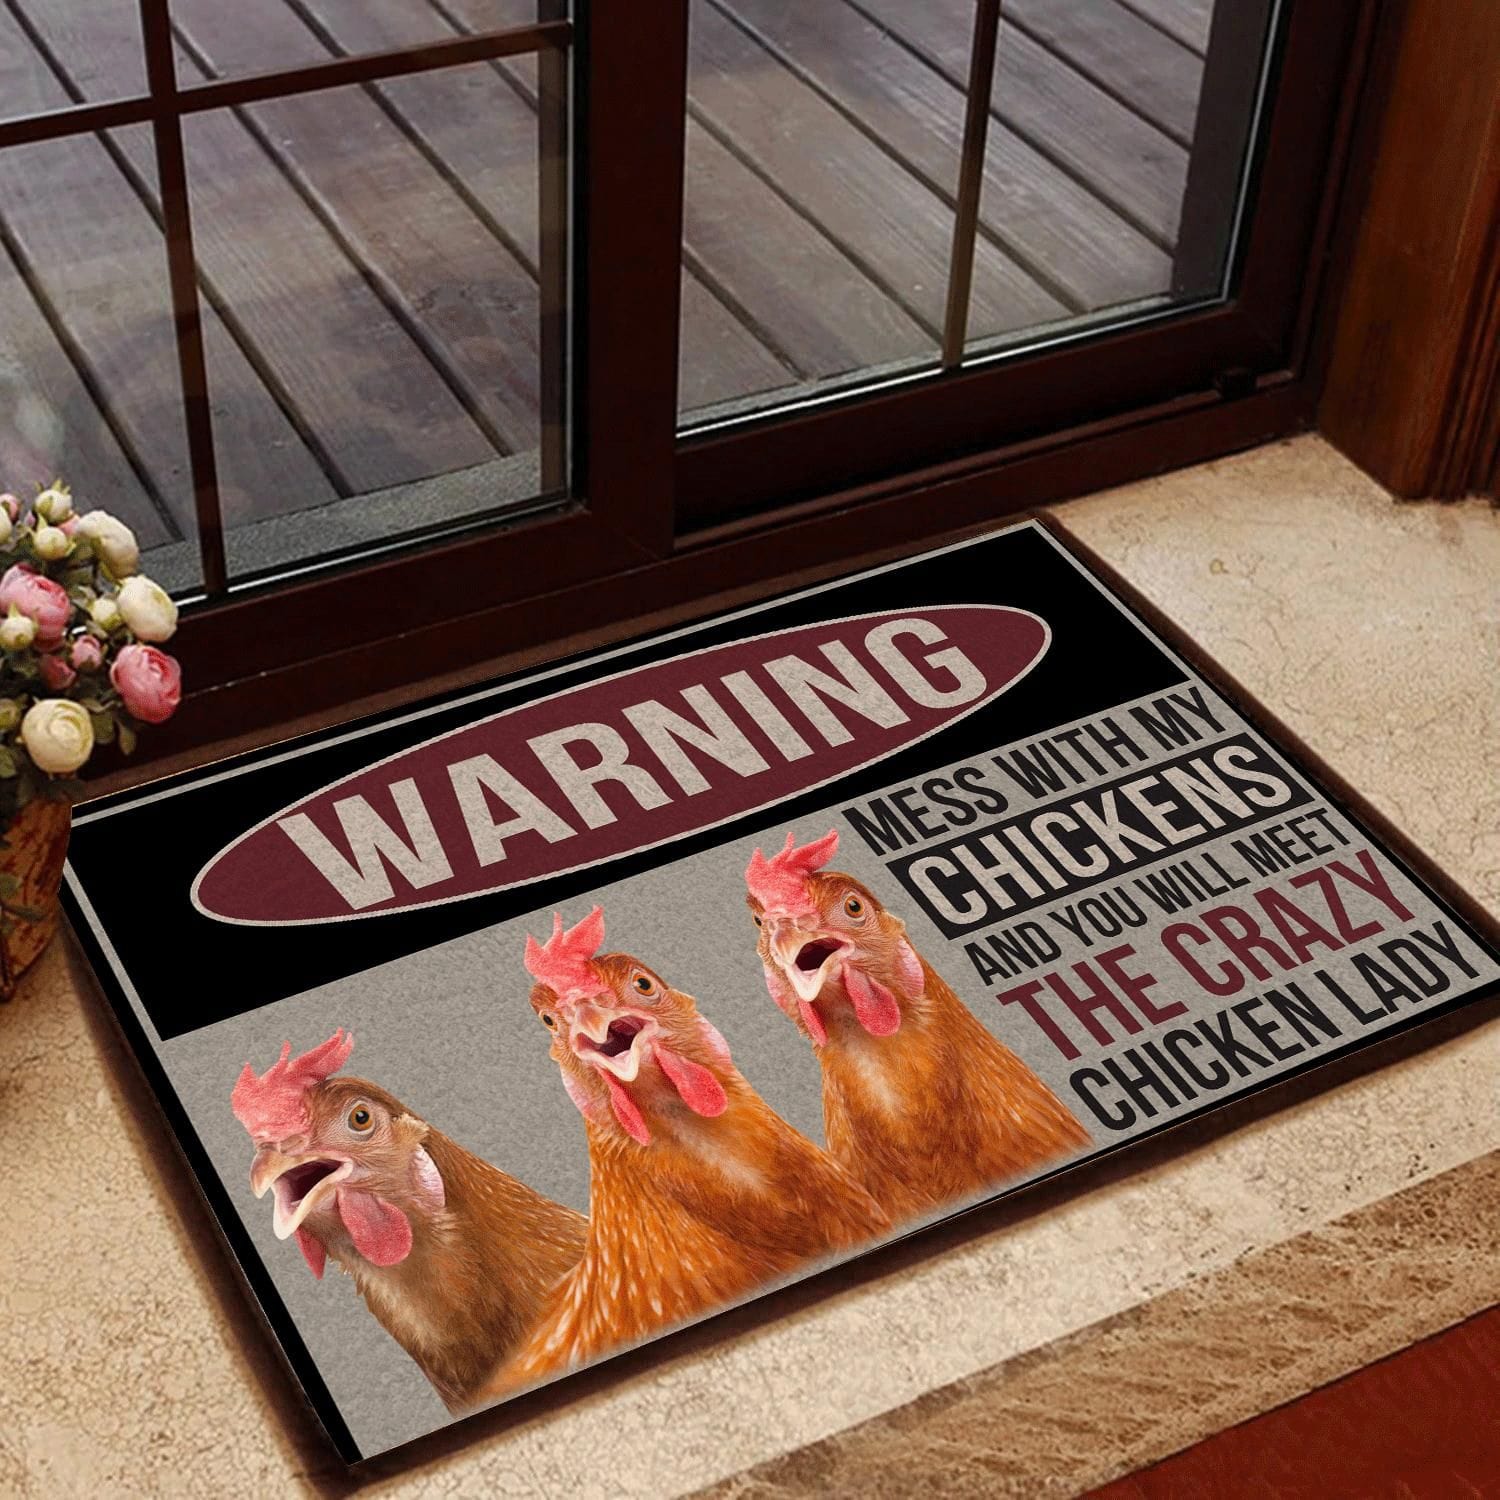 Warning Mess With My Chickens And You Will Meet The Crazy Chicken Lady Chicken Doormat